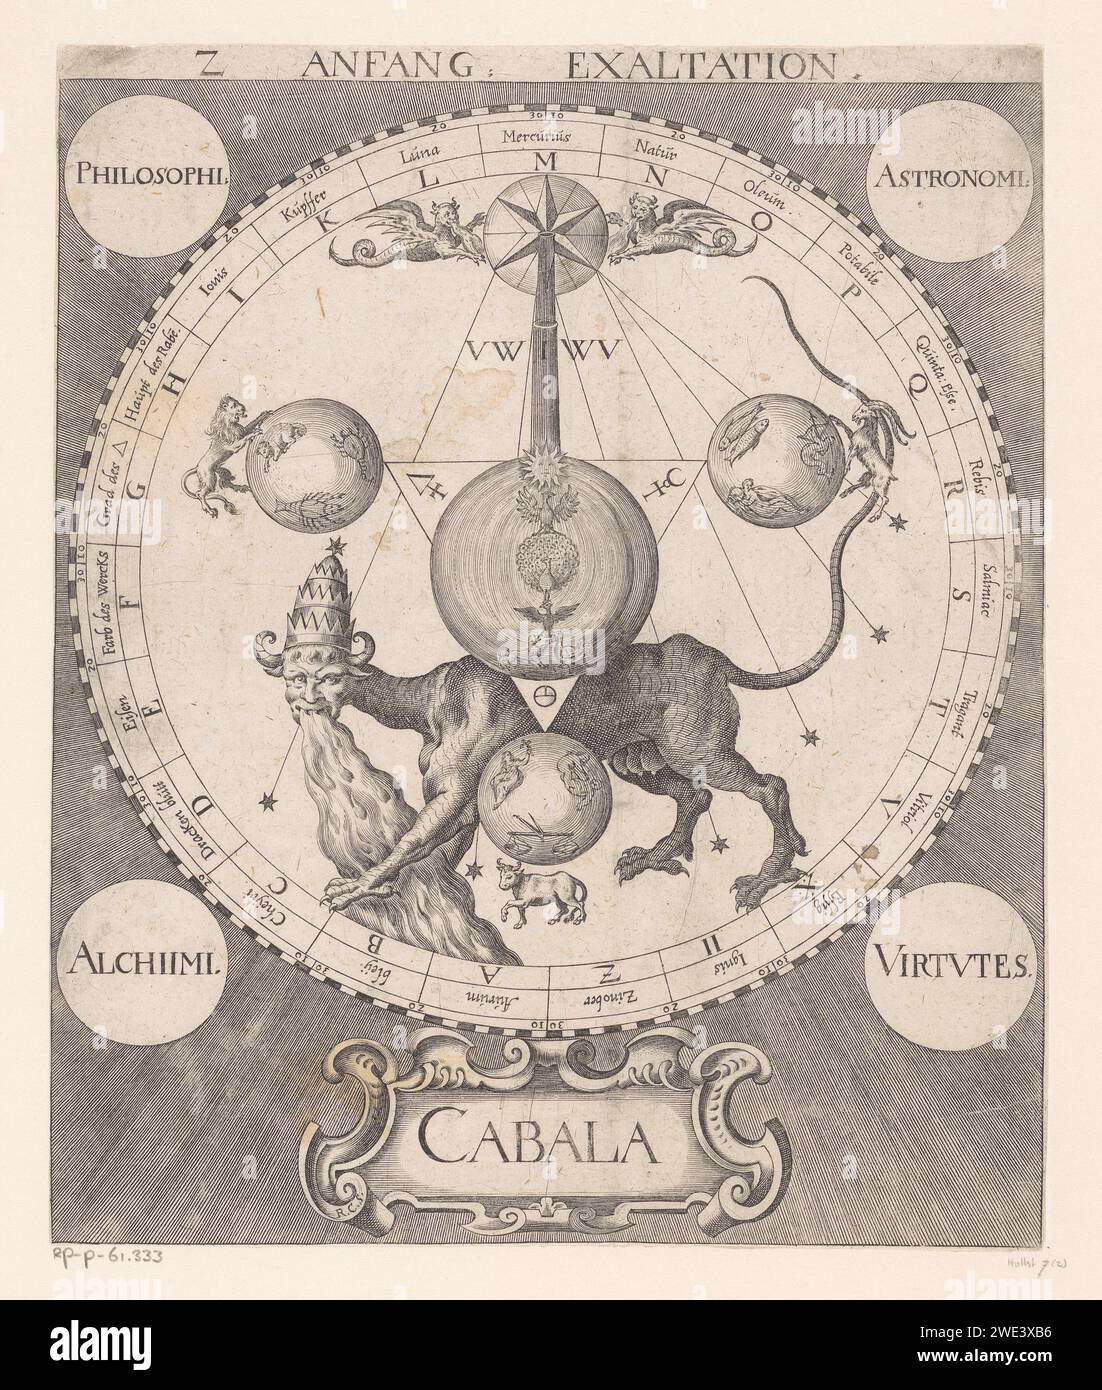 Begin the Raping, Raphael Custos, 1615 print In the middle of the so -called 'philosophical egg', lying on a dragonfly creature. Both surrounded by the twelve constellations and two rings with the chemical alphabet of the Cabala. Augsburg paper engraving alchemistic symbols. bottles: philosophical egg (ovum philosophicum). dragon (large fabulous serpent, sometimes with wings and legs). zodiac; the twelve zodiacal signs together Stock Photo